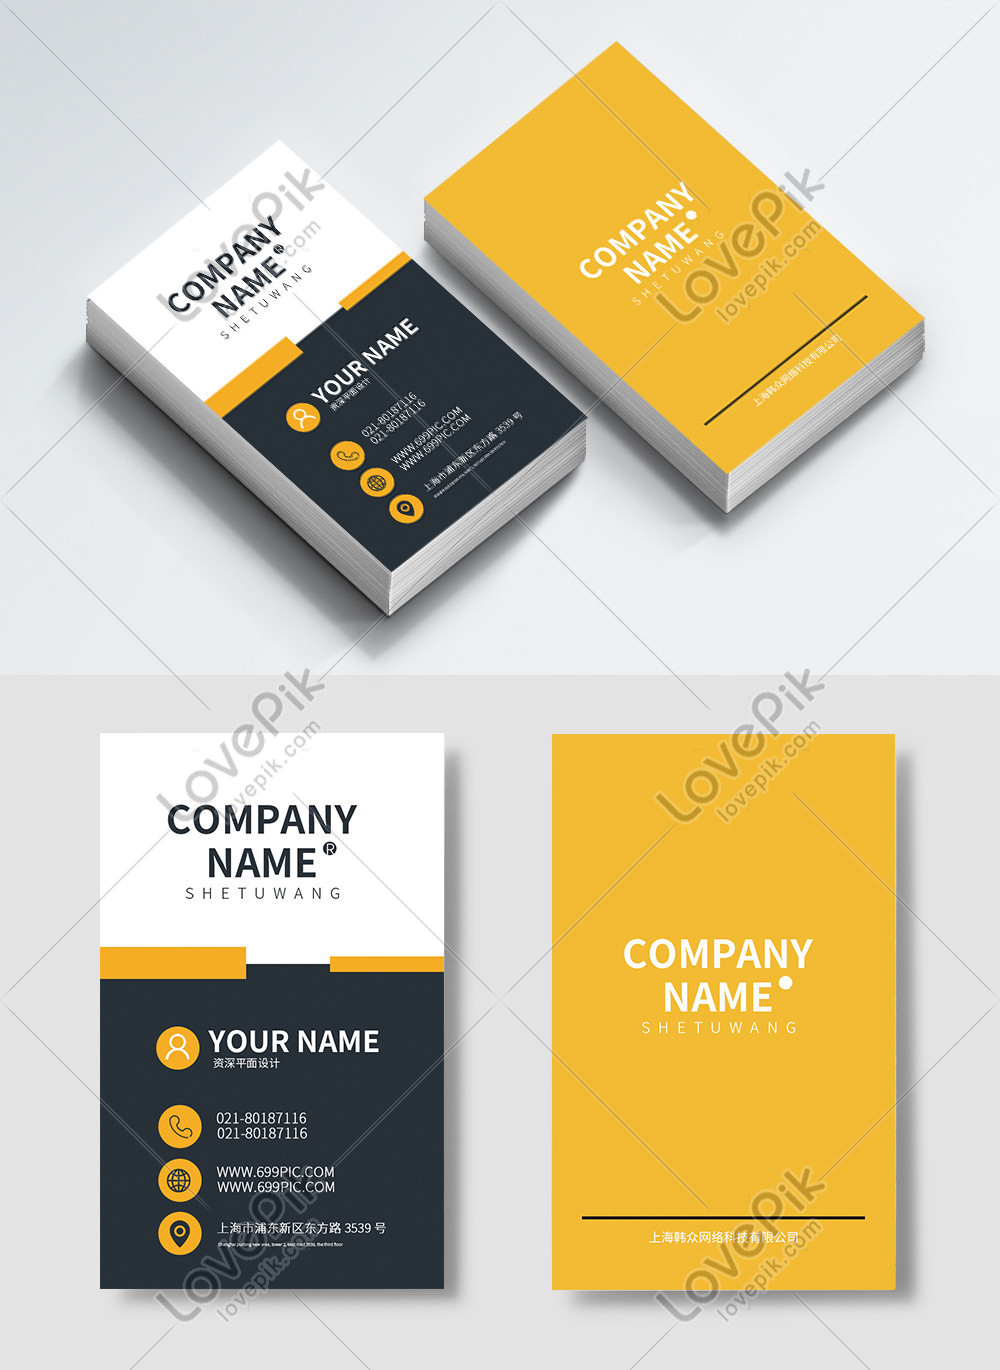 Download Vertical Yellow Minimalist Business Card Design Template Template Image Picture Free Download 401558255 Lovepik Com Yellowimages Mockups